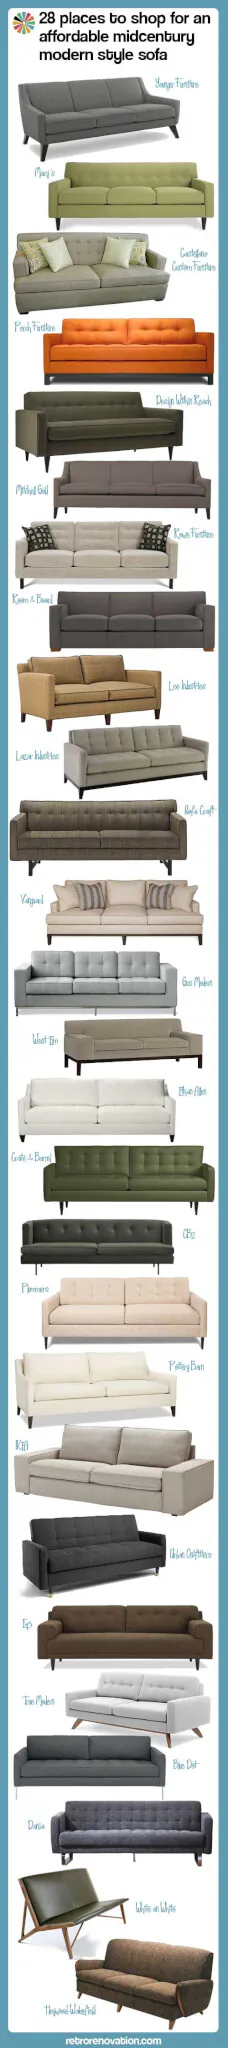 28 vintage reproduction sofas